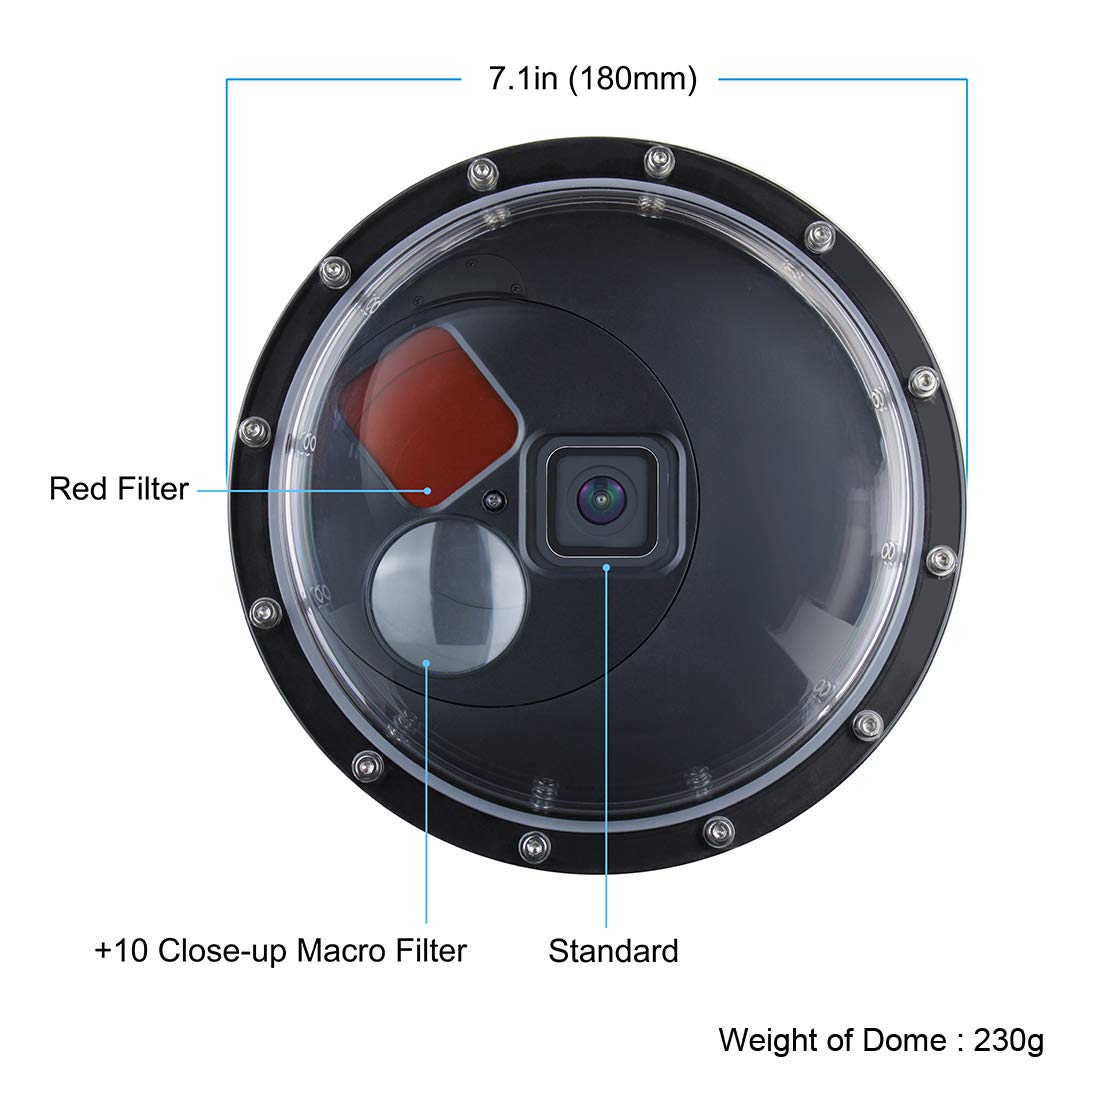 SOONSUN Dome Port for GoPro Hero 8 Black, Dome Lens Waterproof Housing Case with Trigger and Floating Hand Grip for GoPro HERO8 Black Camera, Built-in Switchable Red Filter and 10x Macro Filter